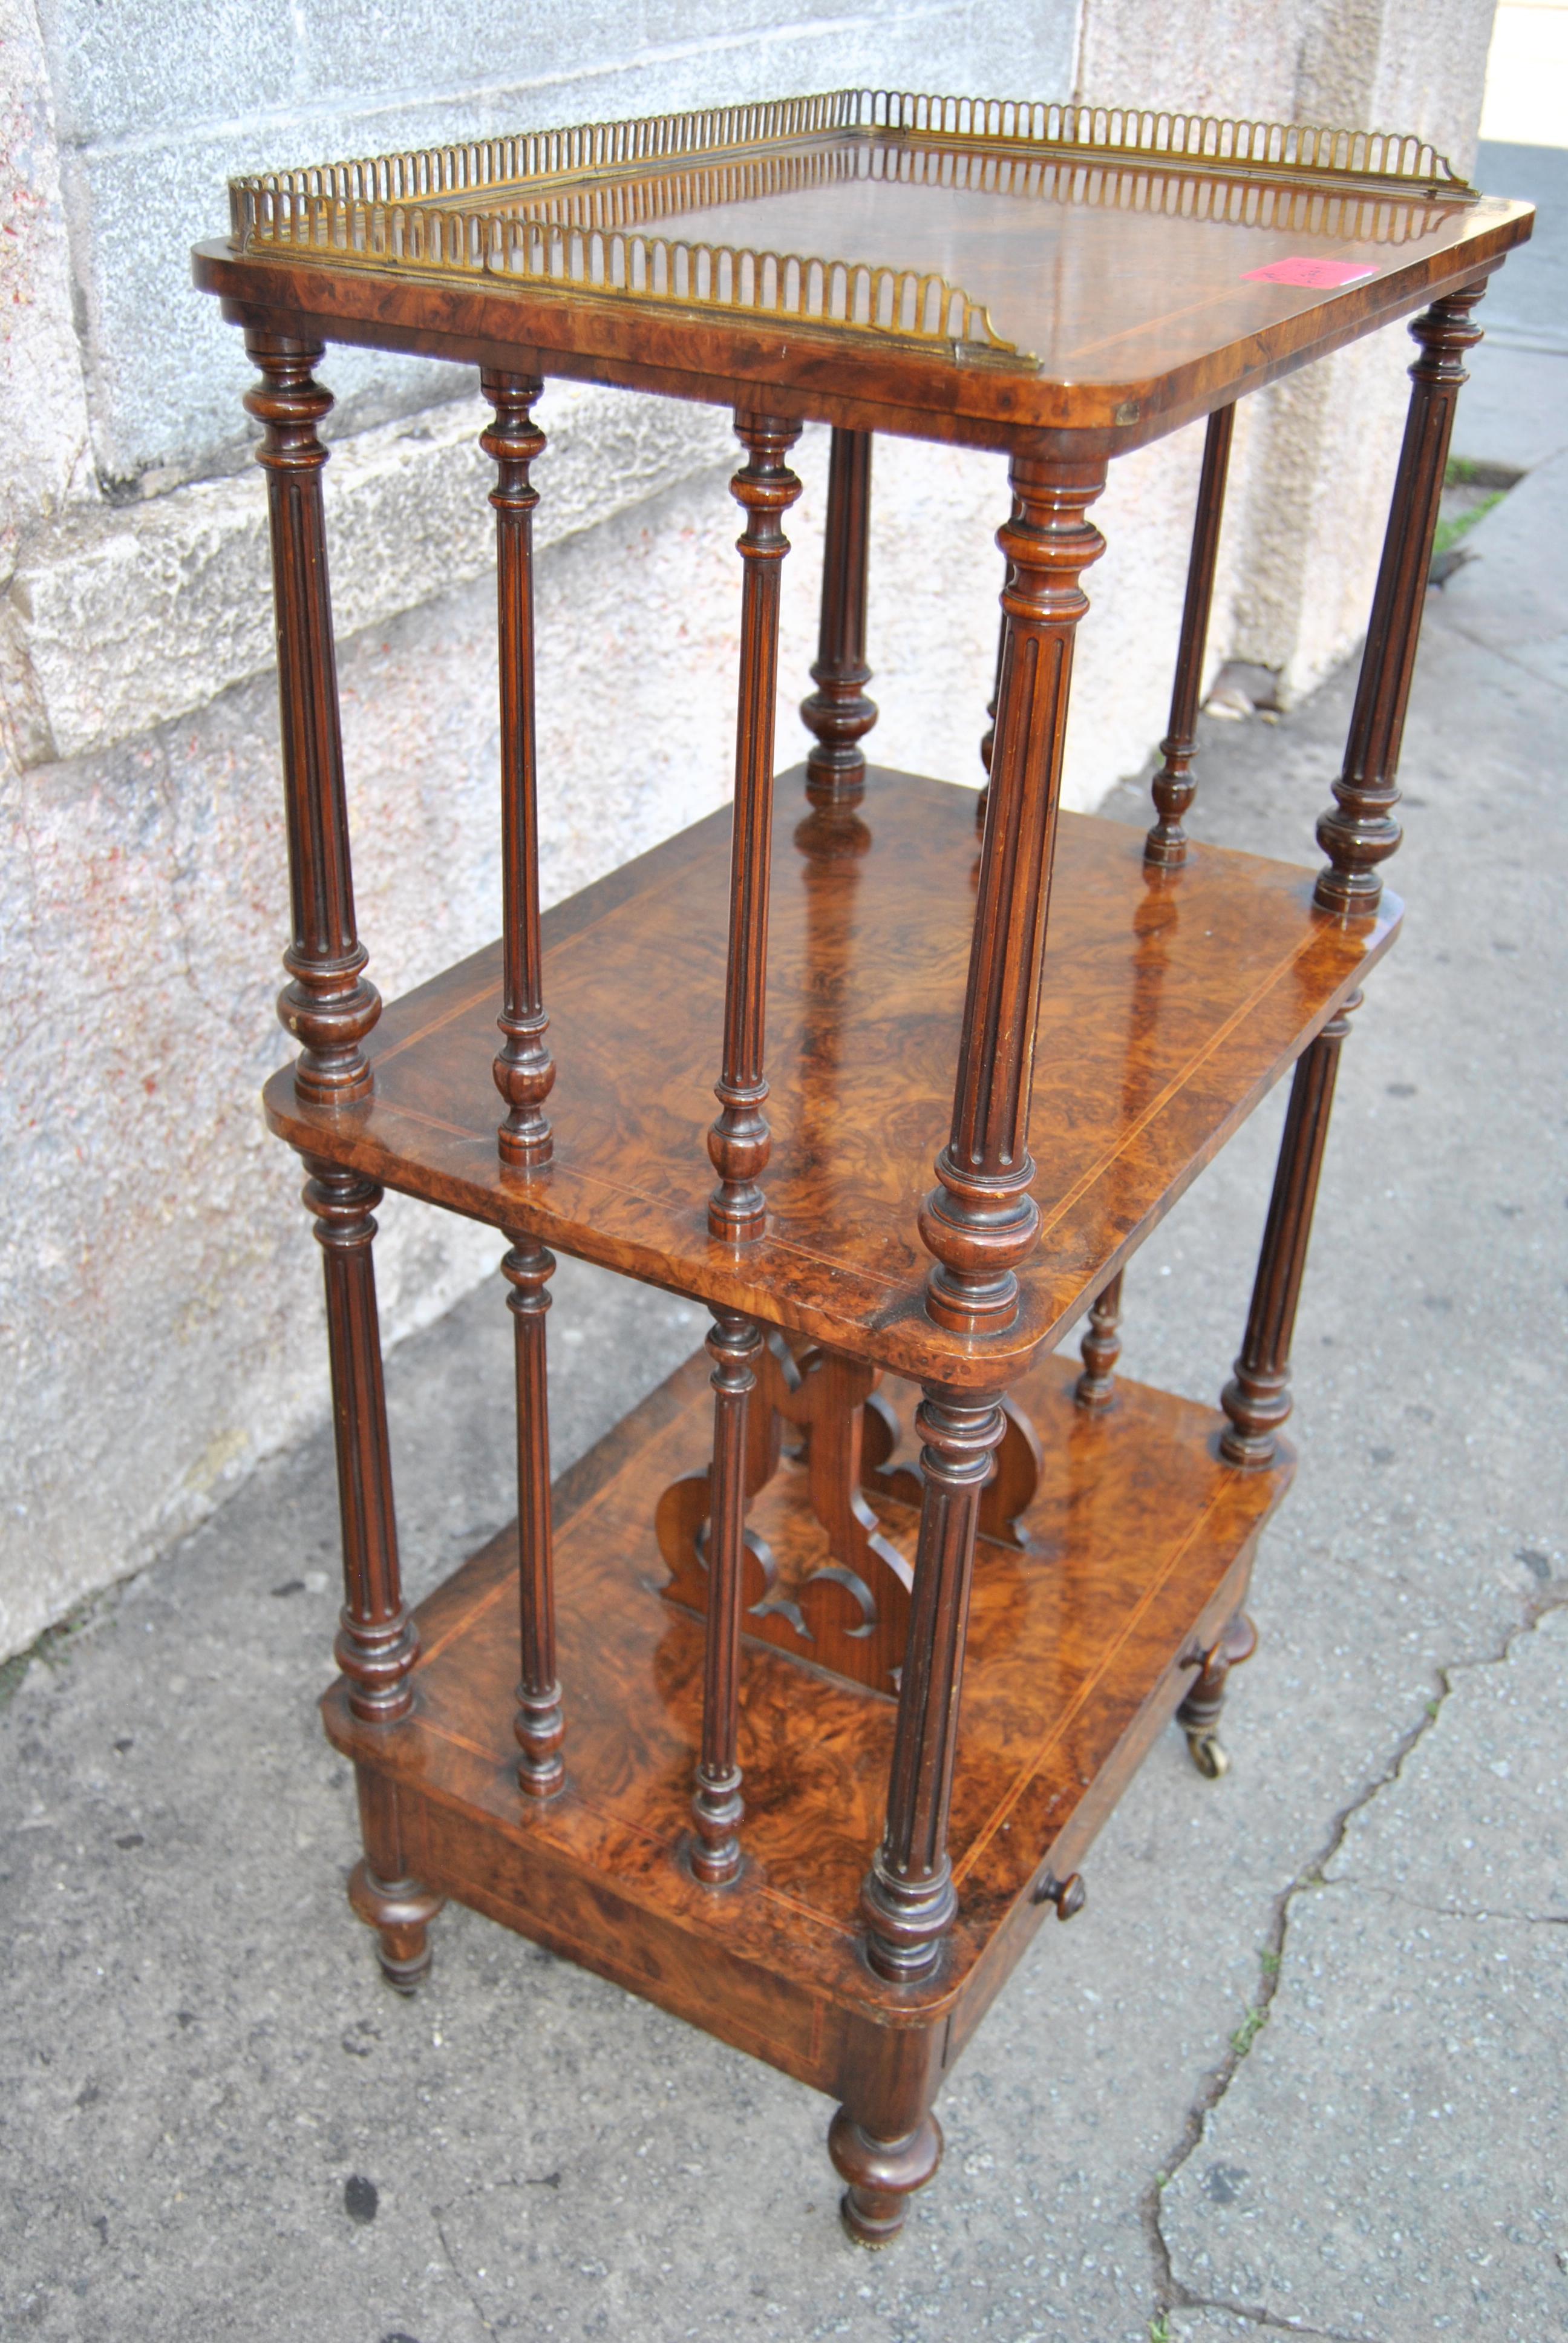 This is a Canterbury or bookcase or 3-stage display or server made in England, circa 1870. The piece is made of Kashmir walnut (the finest cut of Burr Walnut). There is a pierced brass gallery on the right and left sides and across the back of the